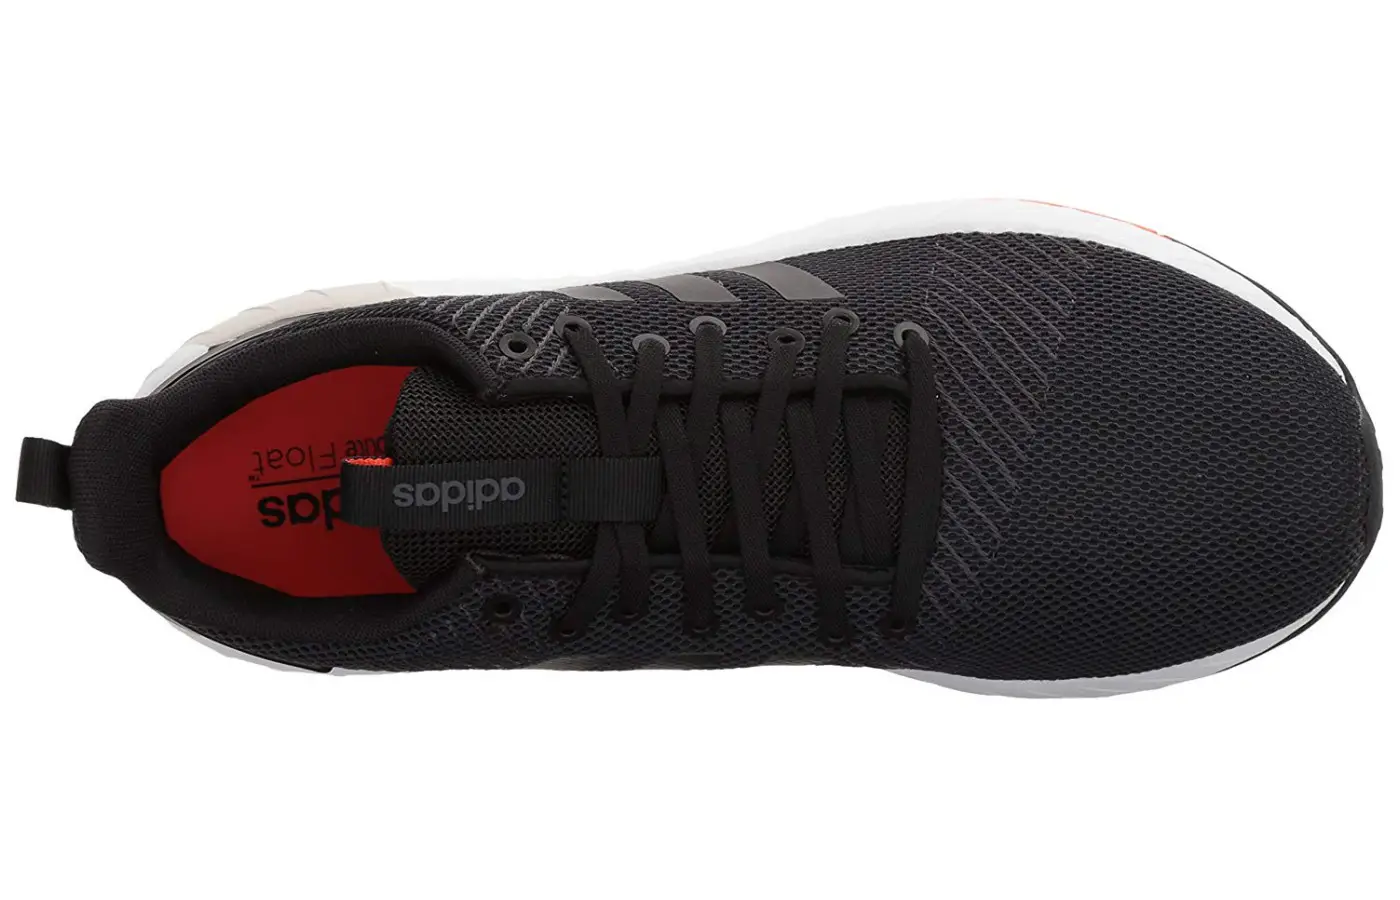 Adidas Questar BYD: To Buy or Not in 